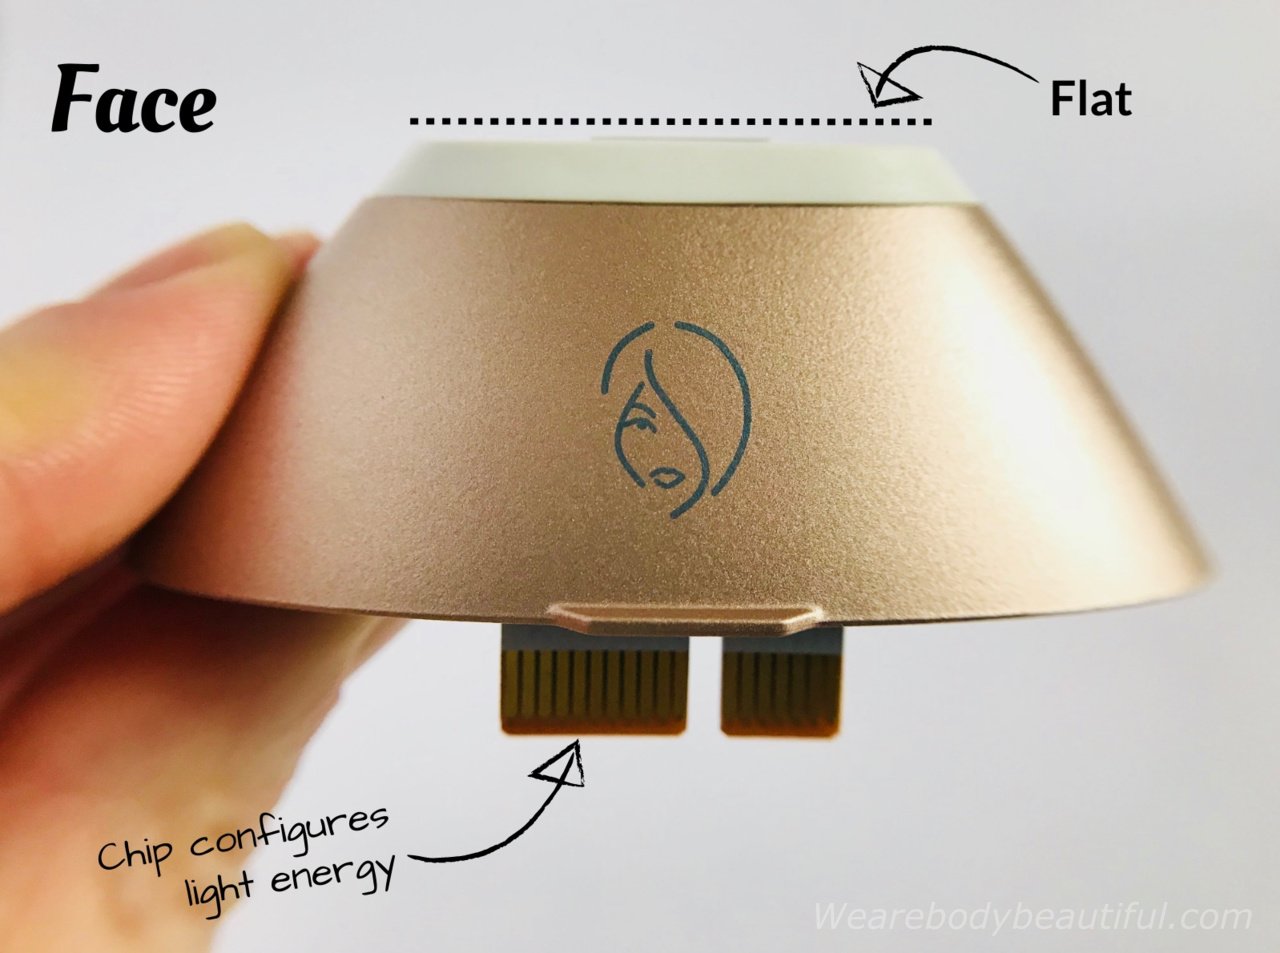 The Philips Lumea Prestige face attachment is small and flat, and fits the small upper lip area and jawline. The chip in the bottom of the window inserts inside the device and configures the light energy for your facial hair.